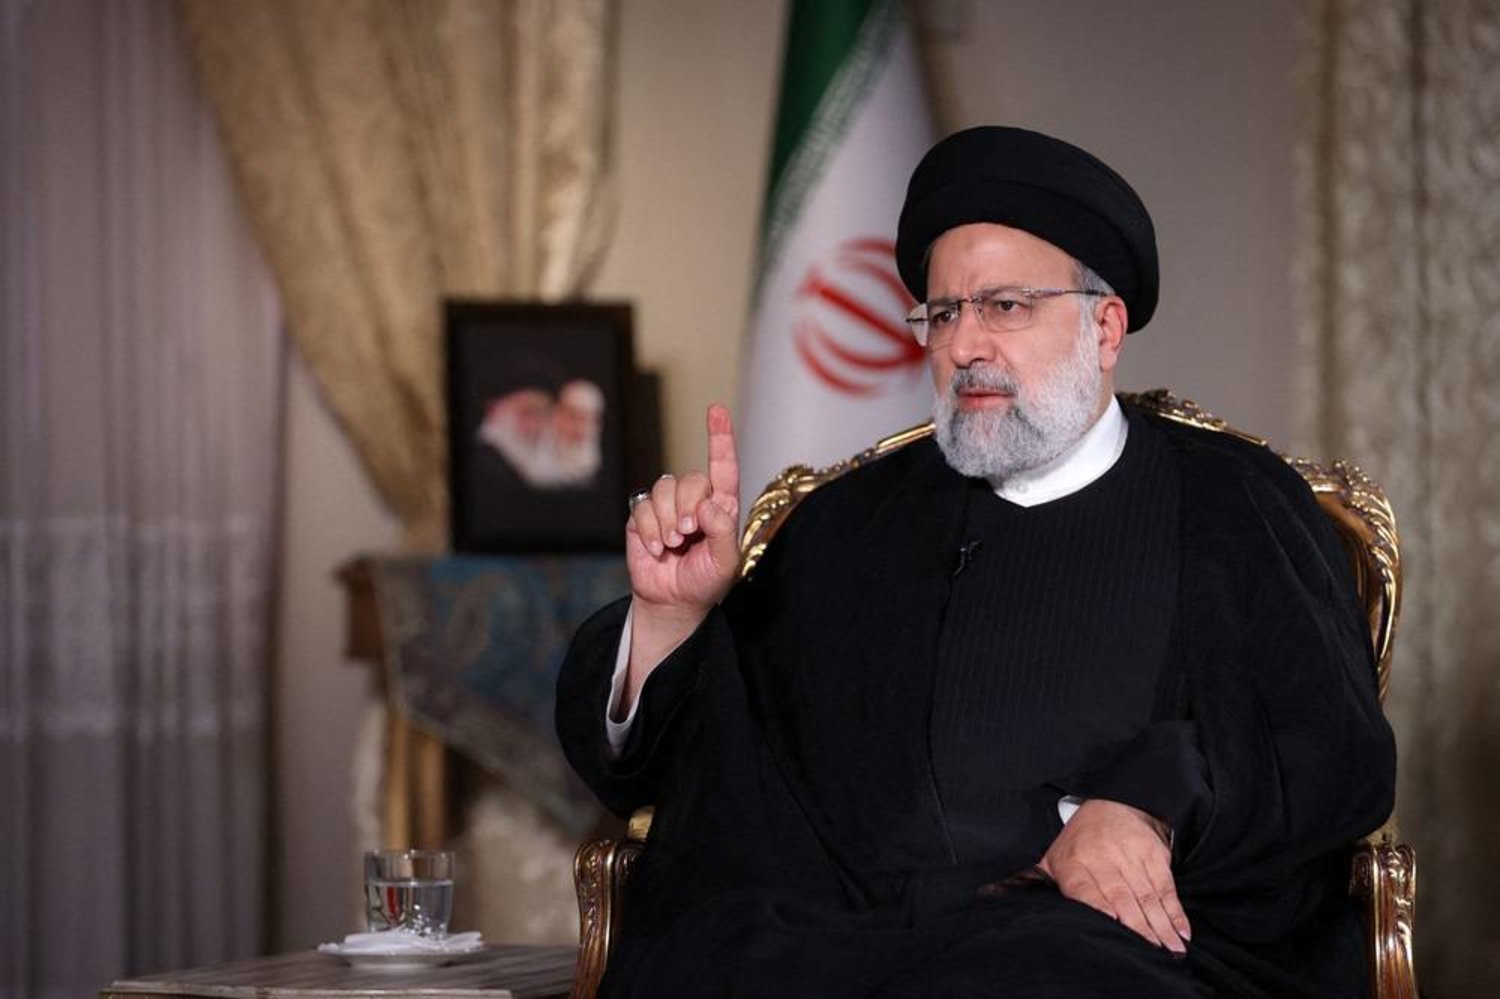 Iran's president has said that the attack against Israel has stopped, and Israel will retaliate heavily